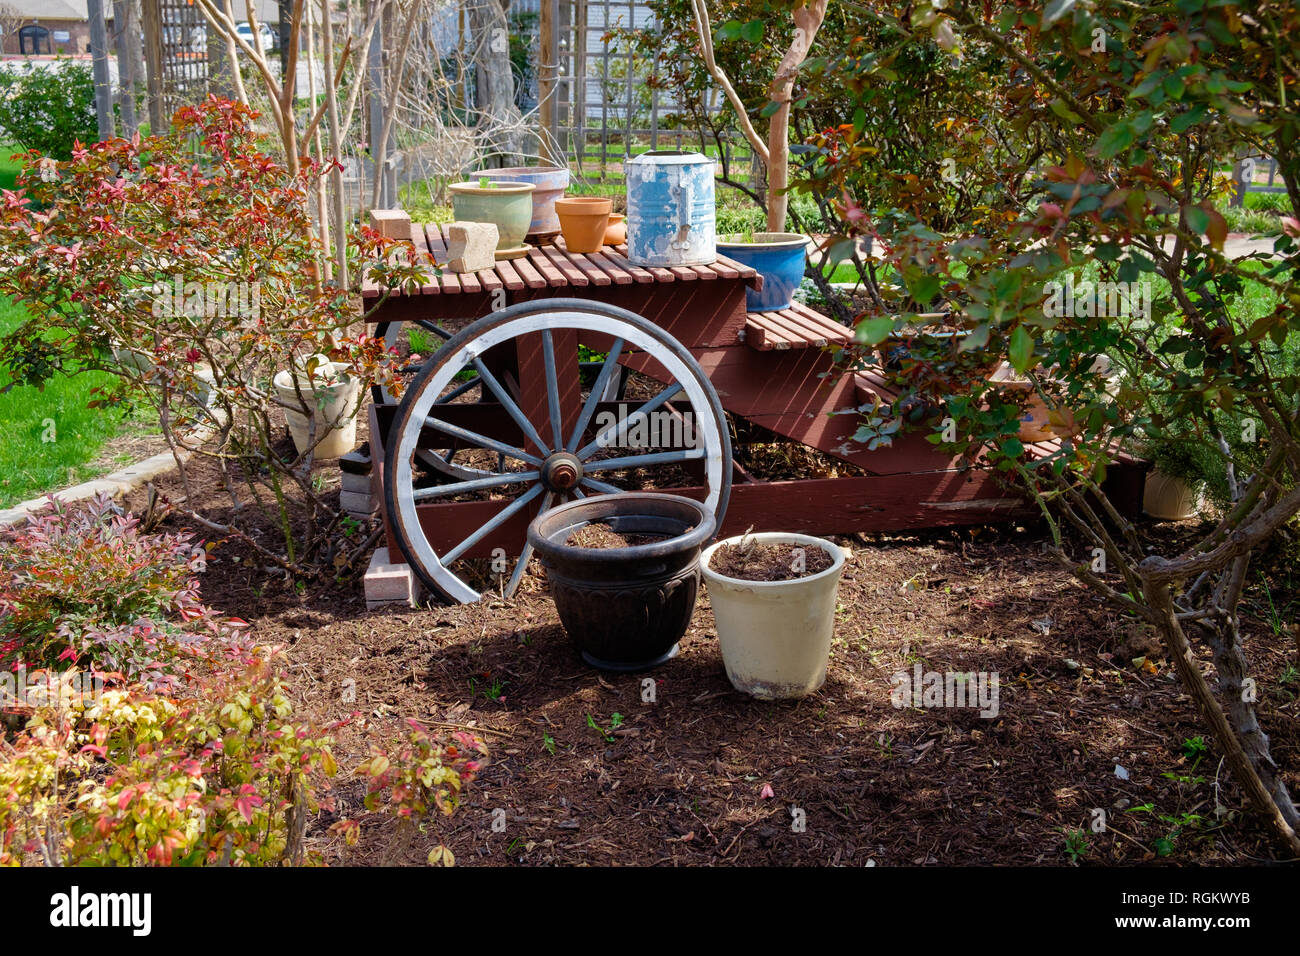 Rustic red wooden picnic table outside  in garden with an old wagon wheel next to it & various flower pots on the table and benches. Trees & bushes. Stock Photo